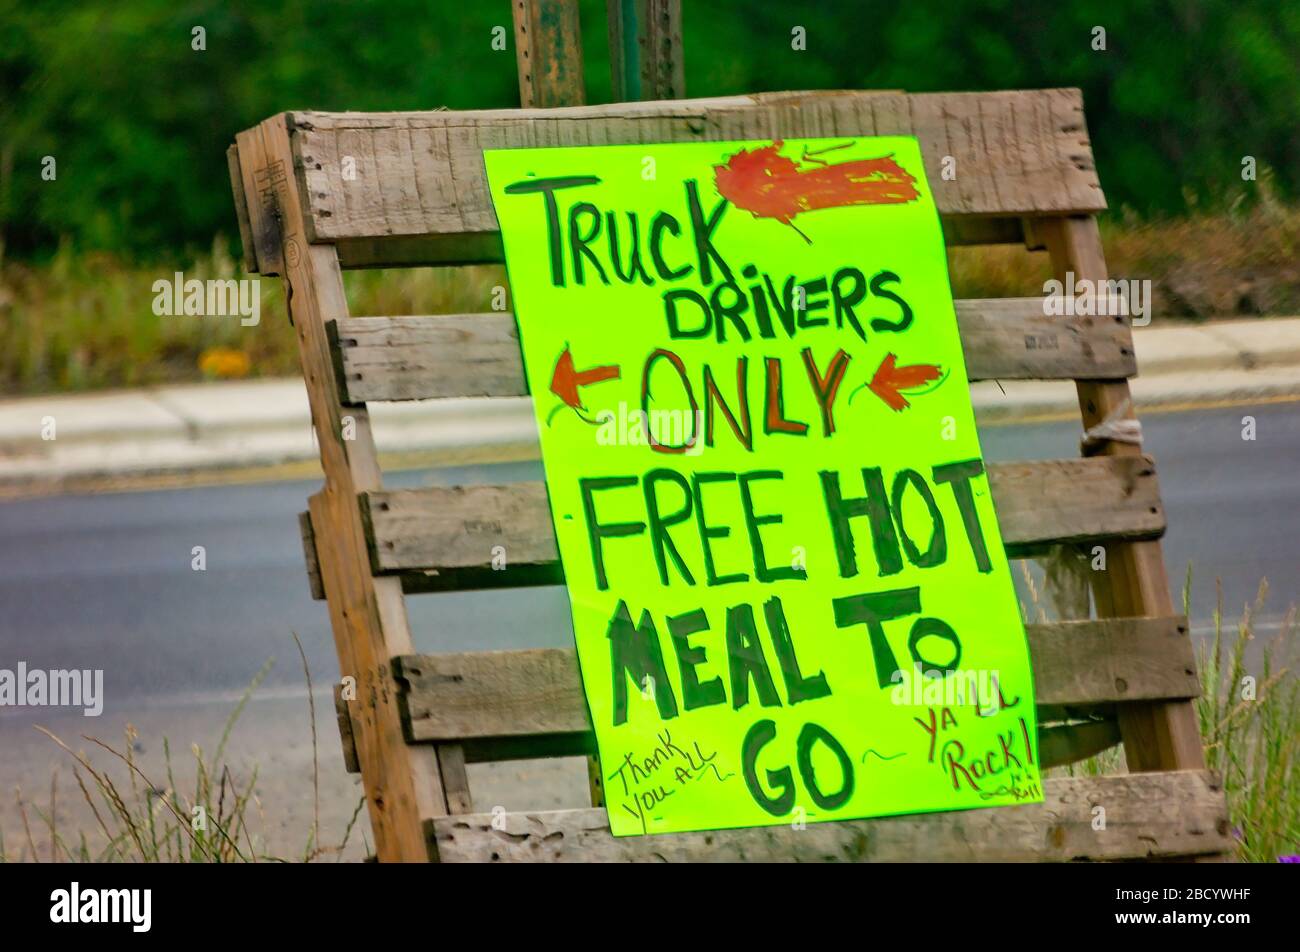 A sign advertises free hot meals for truck drivers during the COVID-19 pandemic, April 4, 2020, in Pensacola, Florida. Stock Photo